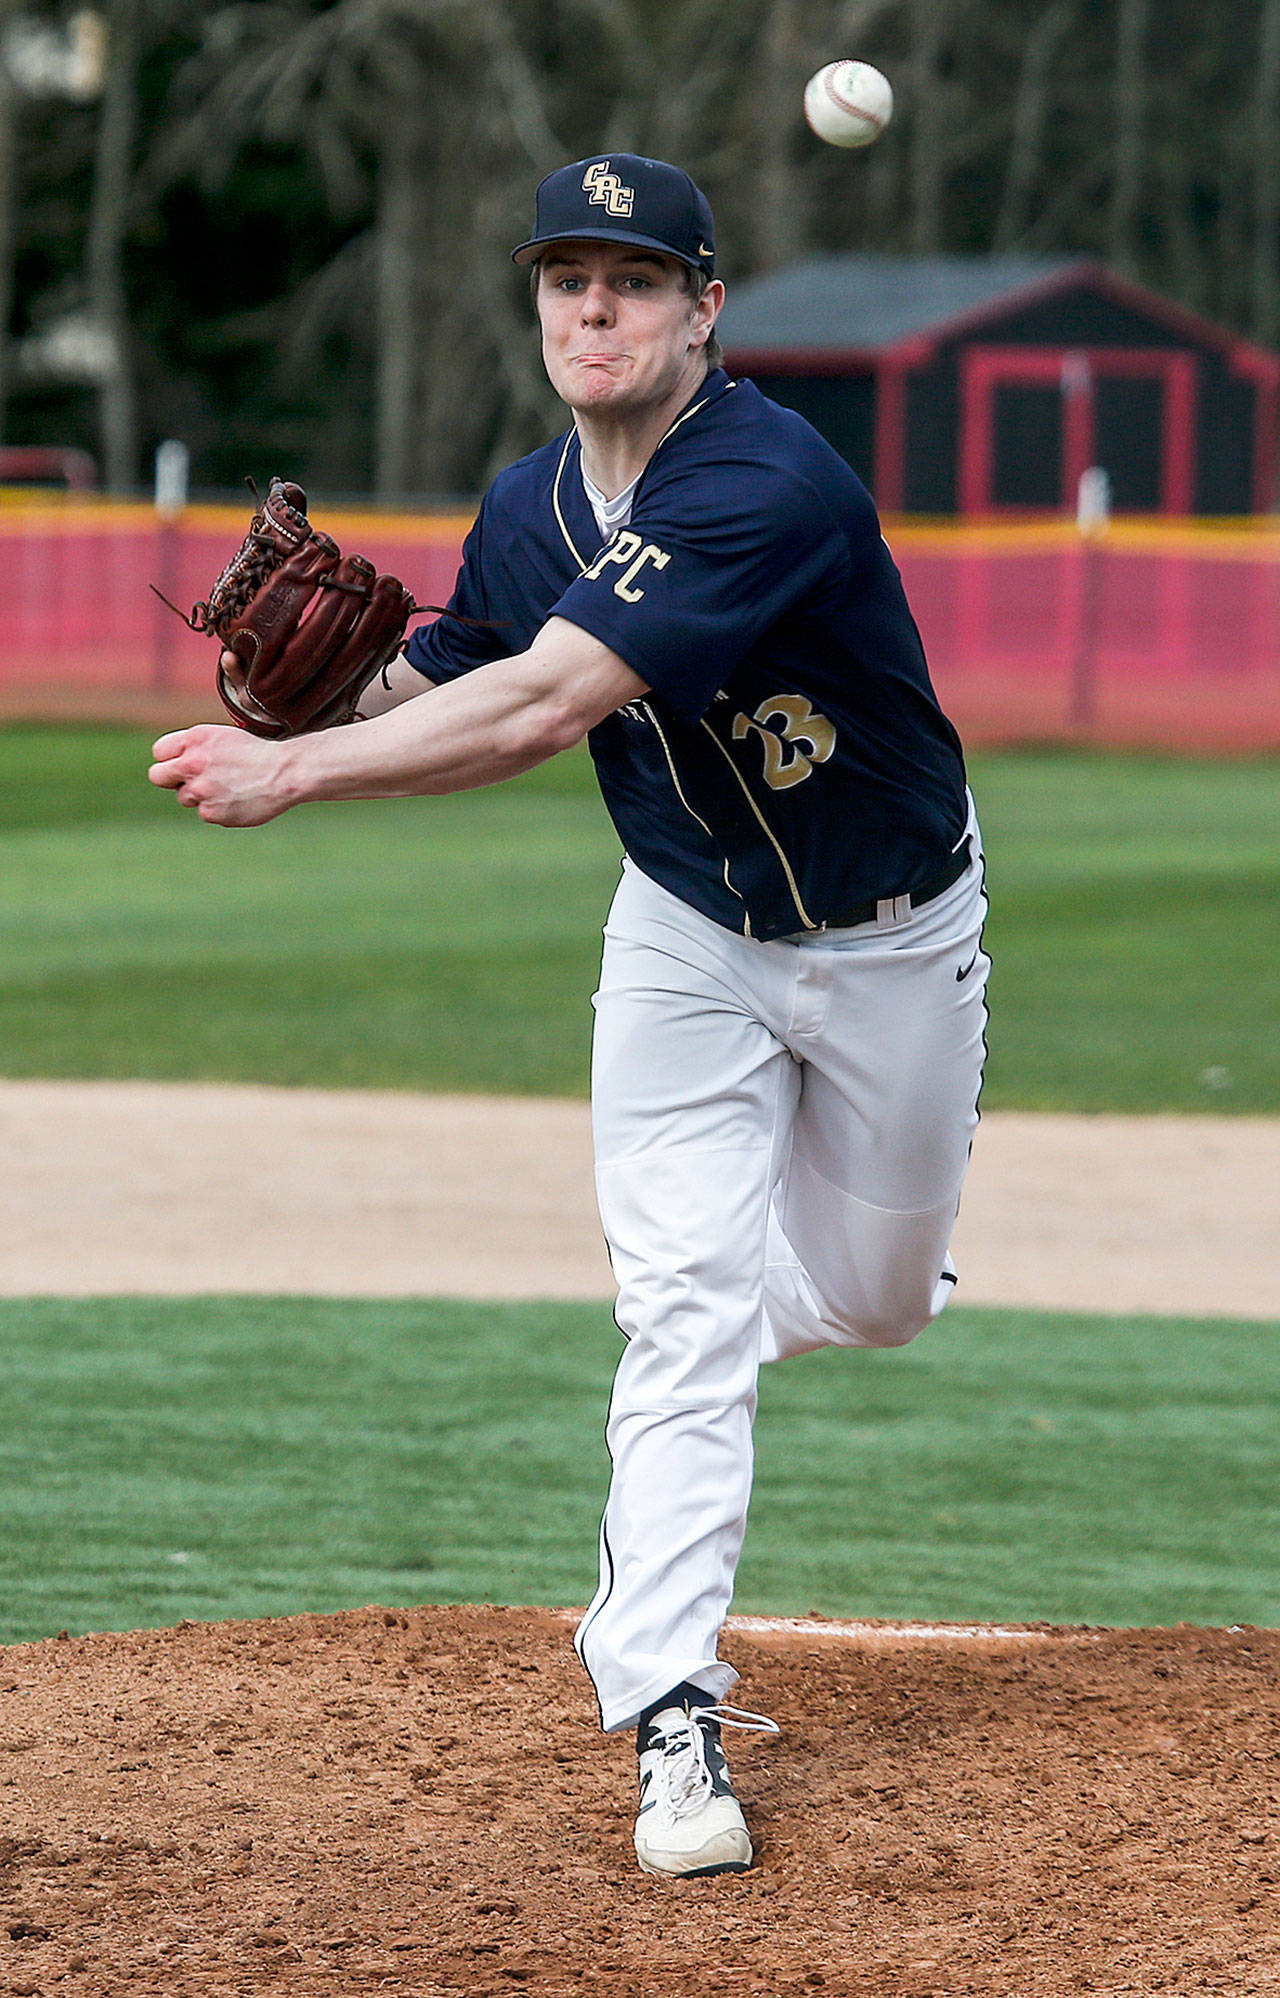 Cedar Park Christian’s Jack Flynn delivers a pitch during a game against Archbishop Murphy on April 11. Flynn is a first-team All-Cascade Conference selection. (Ian Terry / The Herald)